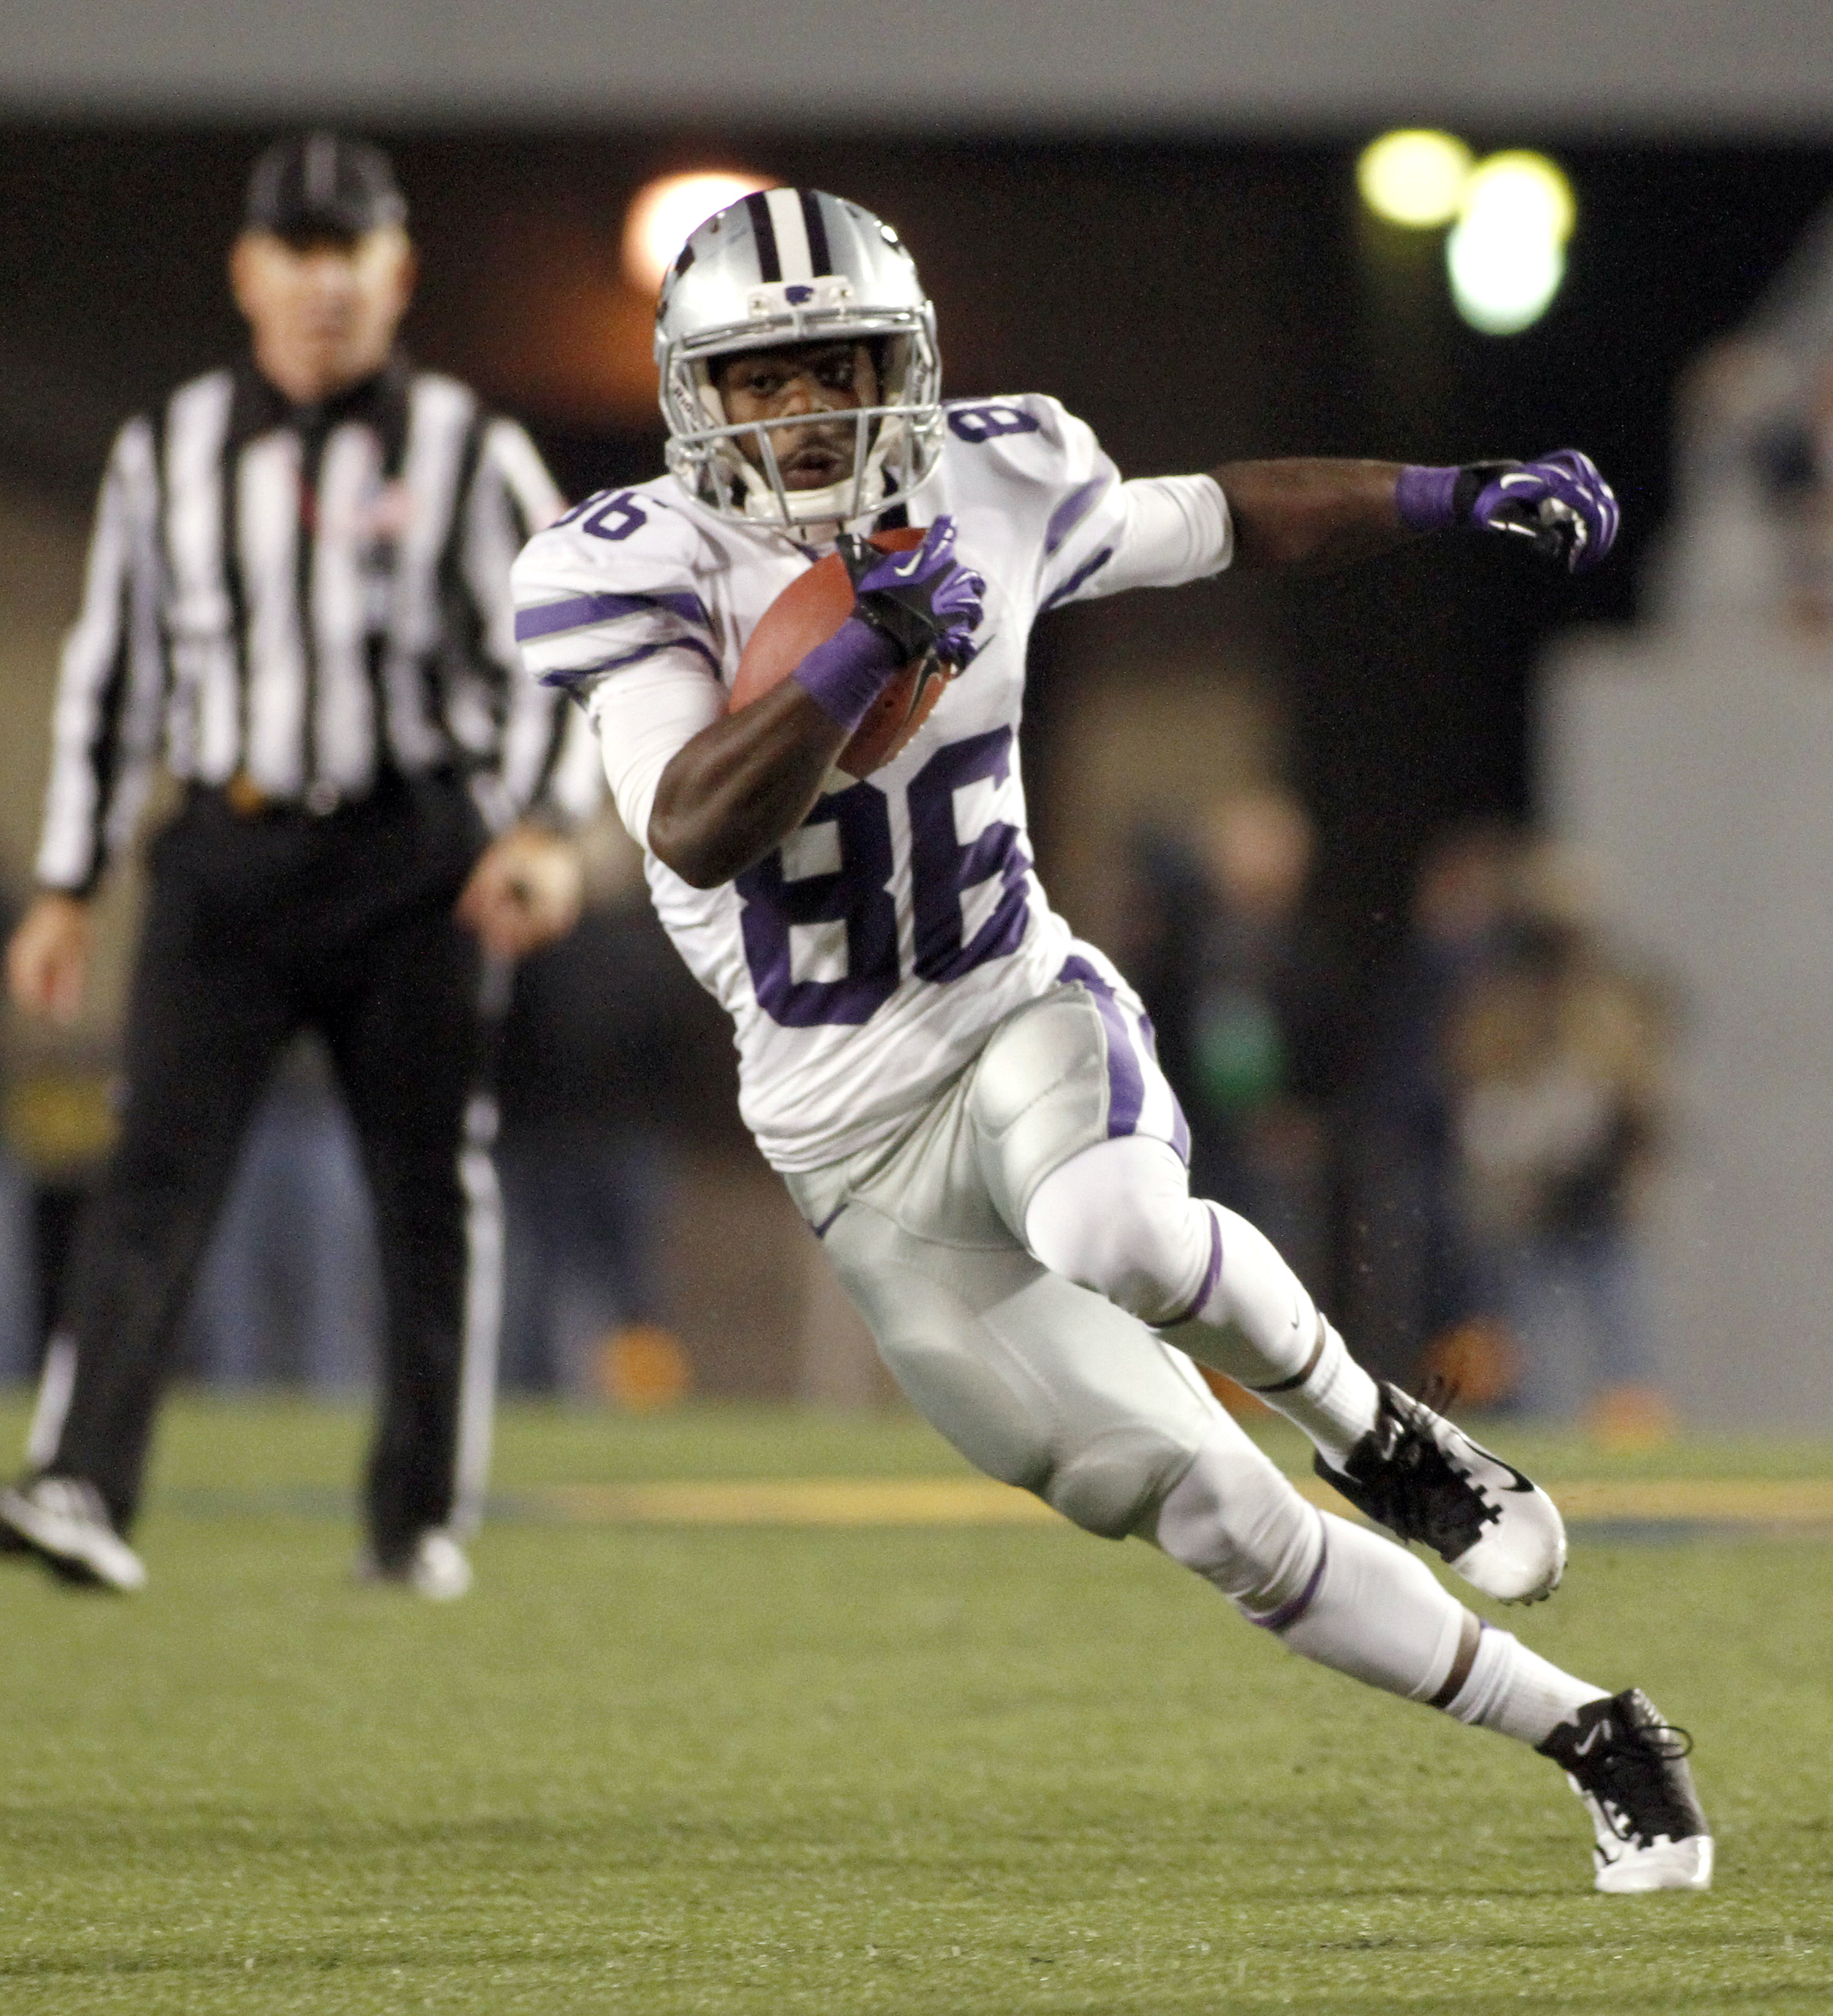 Tramaine Thompson was one of K-State's most underappreciated wide receivers. Isaiah Harris will have a lot to live up to if he ends up wearing the same number as Thompson.